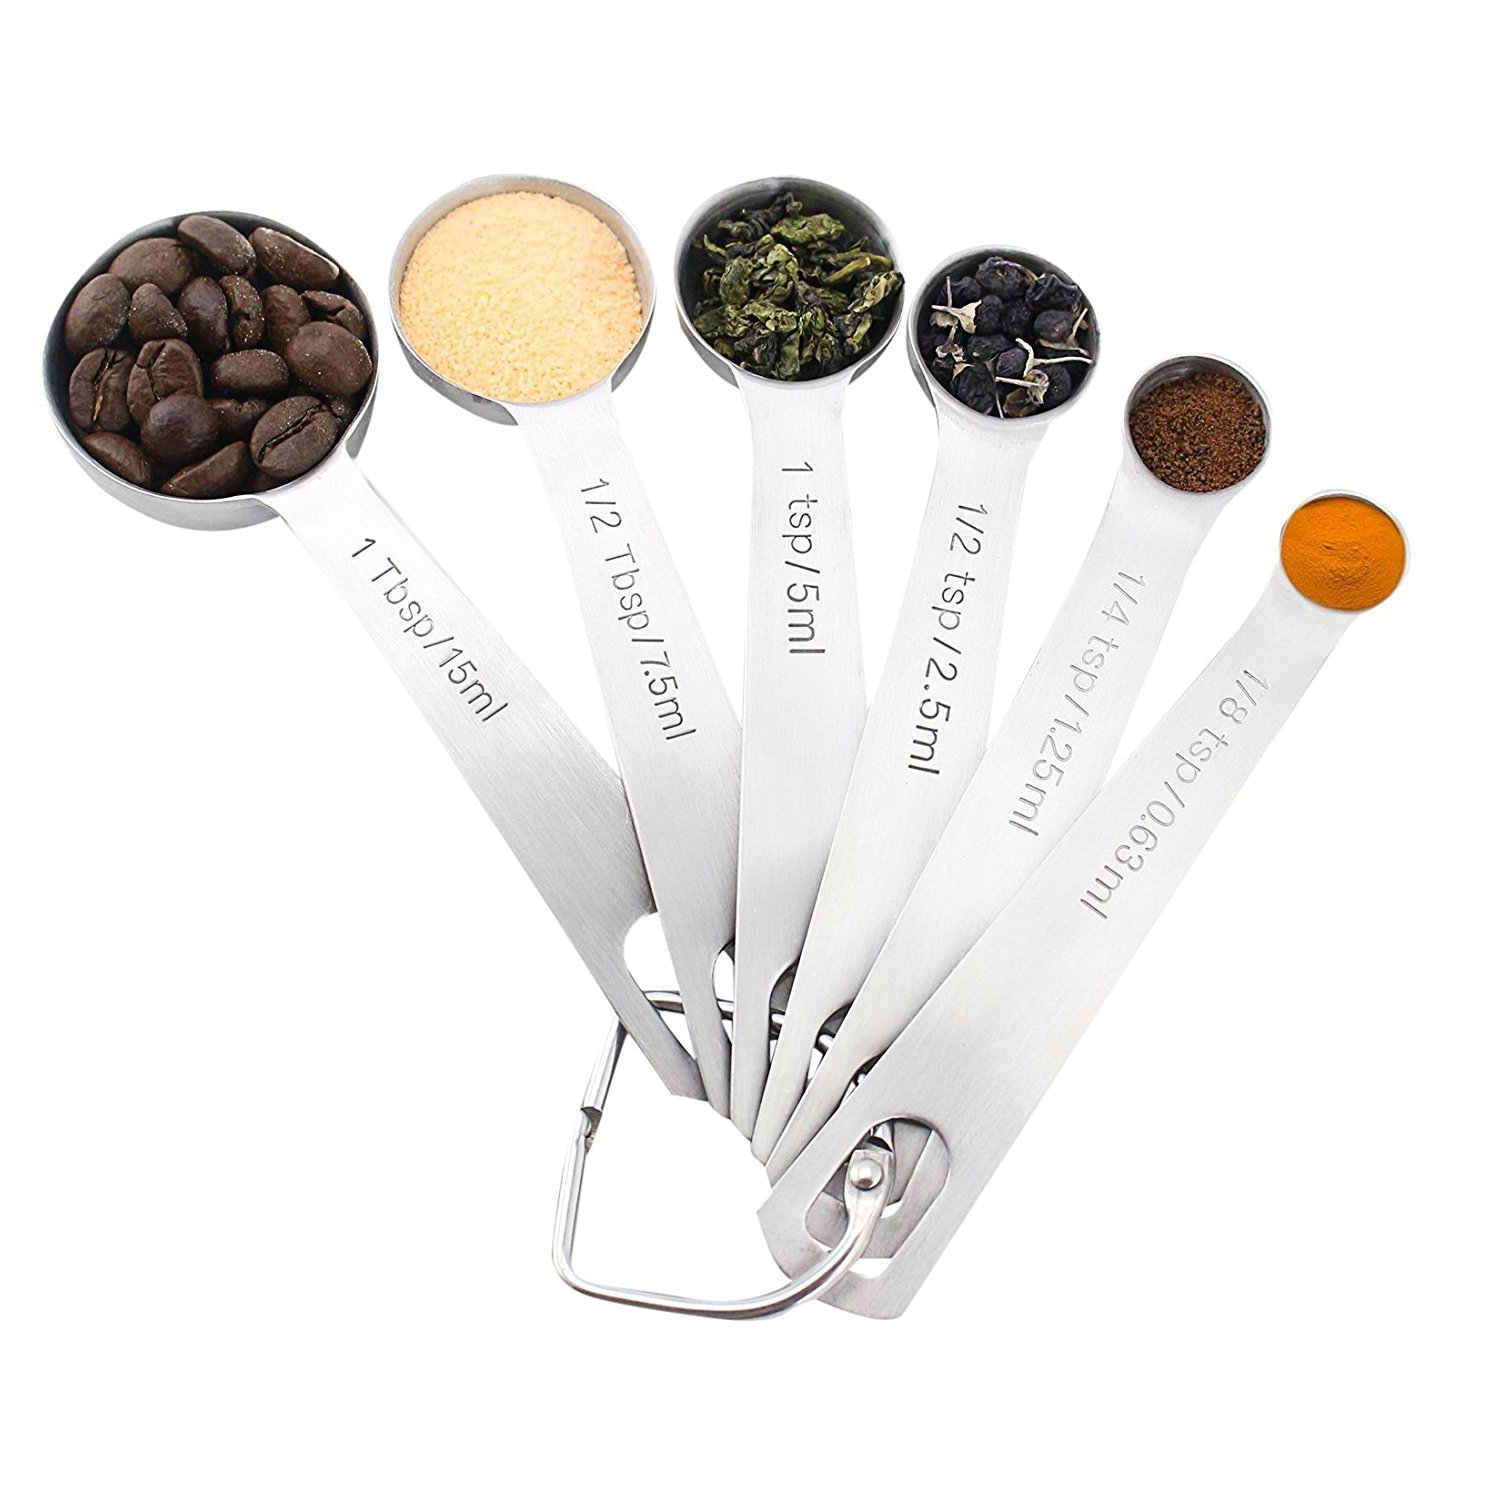 Amazon: Stainless Steel Measuring Spoons with Engraved Measurements Only $9.99!!